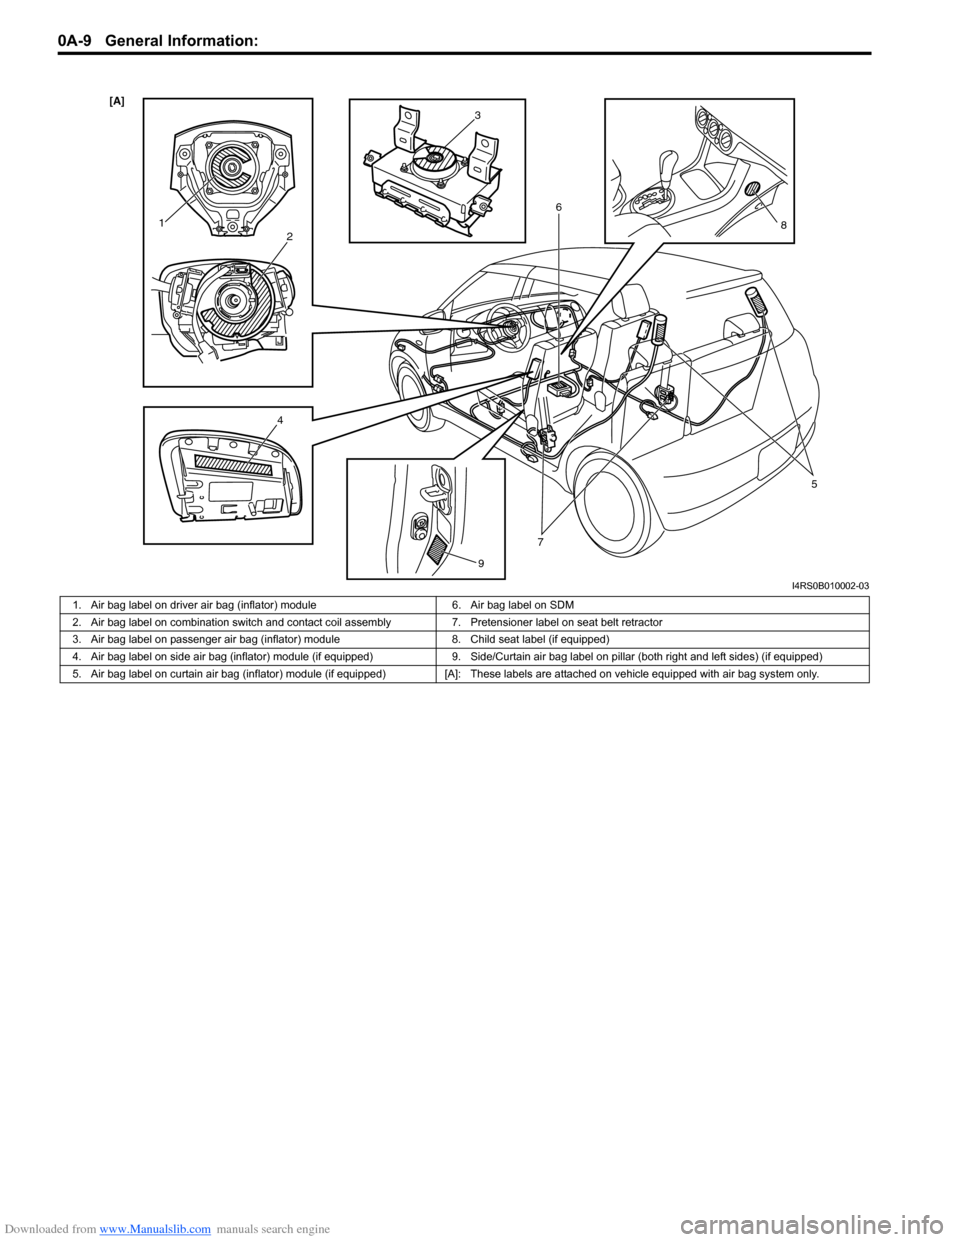 SUZUKI SWIFT 2005 2.G Service Owners Manual Downloaded from www.Manualslib.com manuals search engine 0A-9 General Information: 
[A] 
12
4 5
6
7 8
9
3
I4RS0B010002-03
1. Air bag label on driver air bag (inflator) module 6. Air bag label on SDM
2